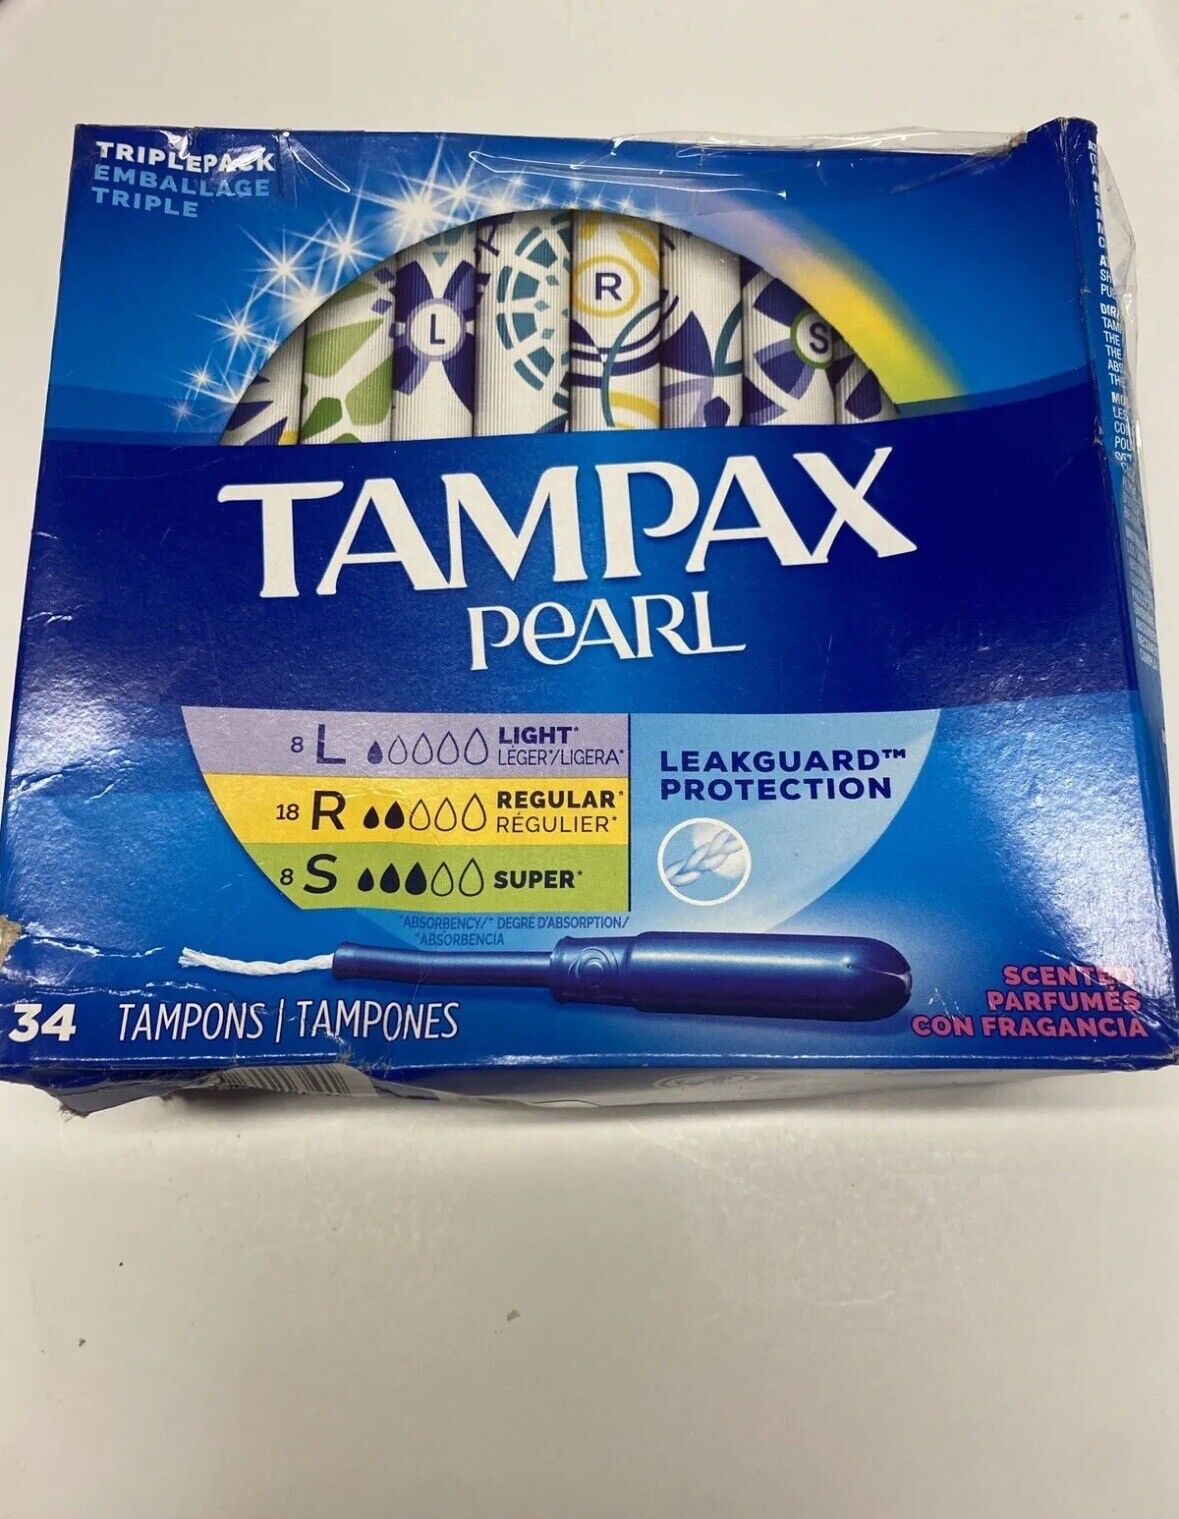 Tampax Pearl 18 Regular 8 Super 8 Light Scented 34 Count Tampons Leakguard Tampax